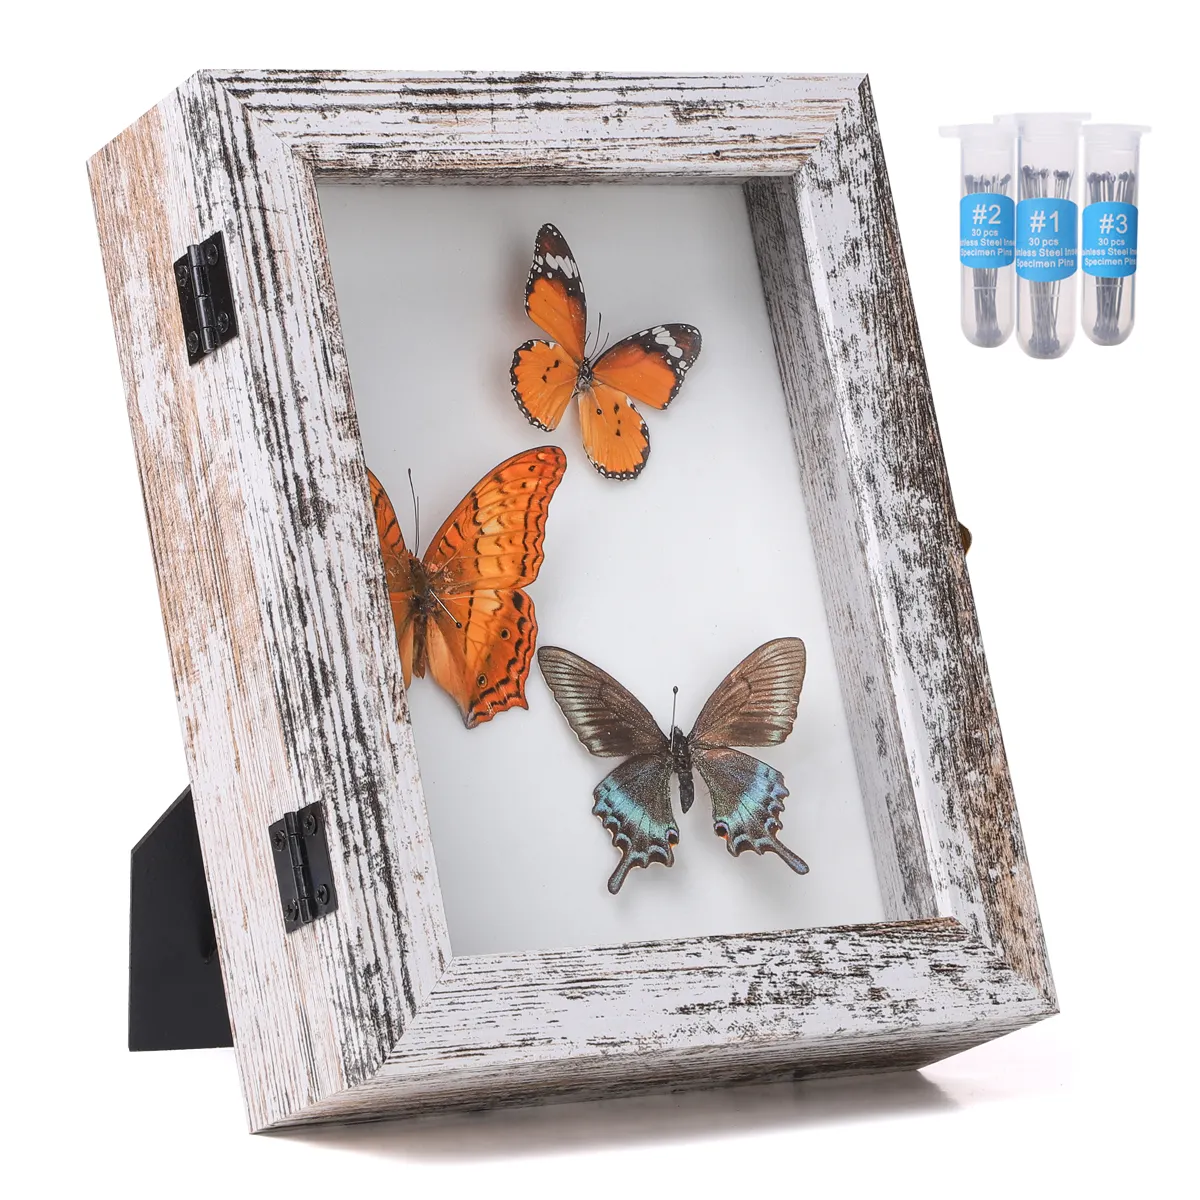 Exquisite Butterfly Specimen Framed Rustic White Butterfly Frame with insect pin Front opening Butterfly Shadow Box Frames